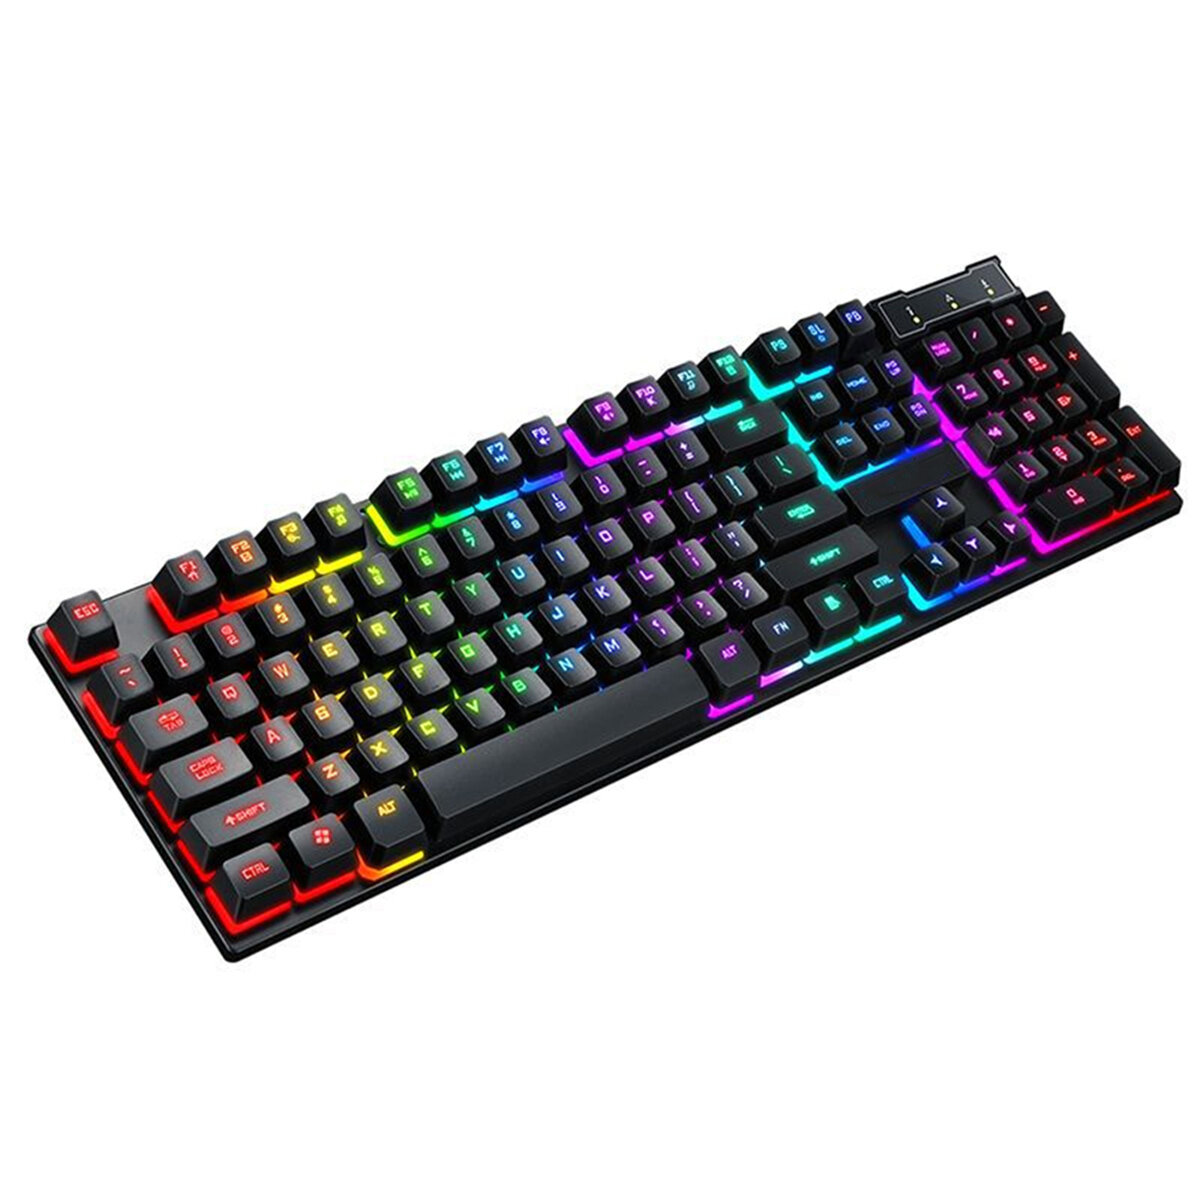 

T-Wolf T20 Wired Gaming Keyboard 104 Keys Mechanical Feeling Colorful RGB Backlit Home Office Keyboard